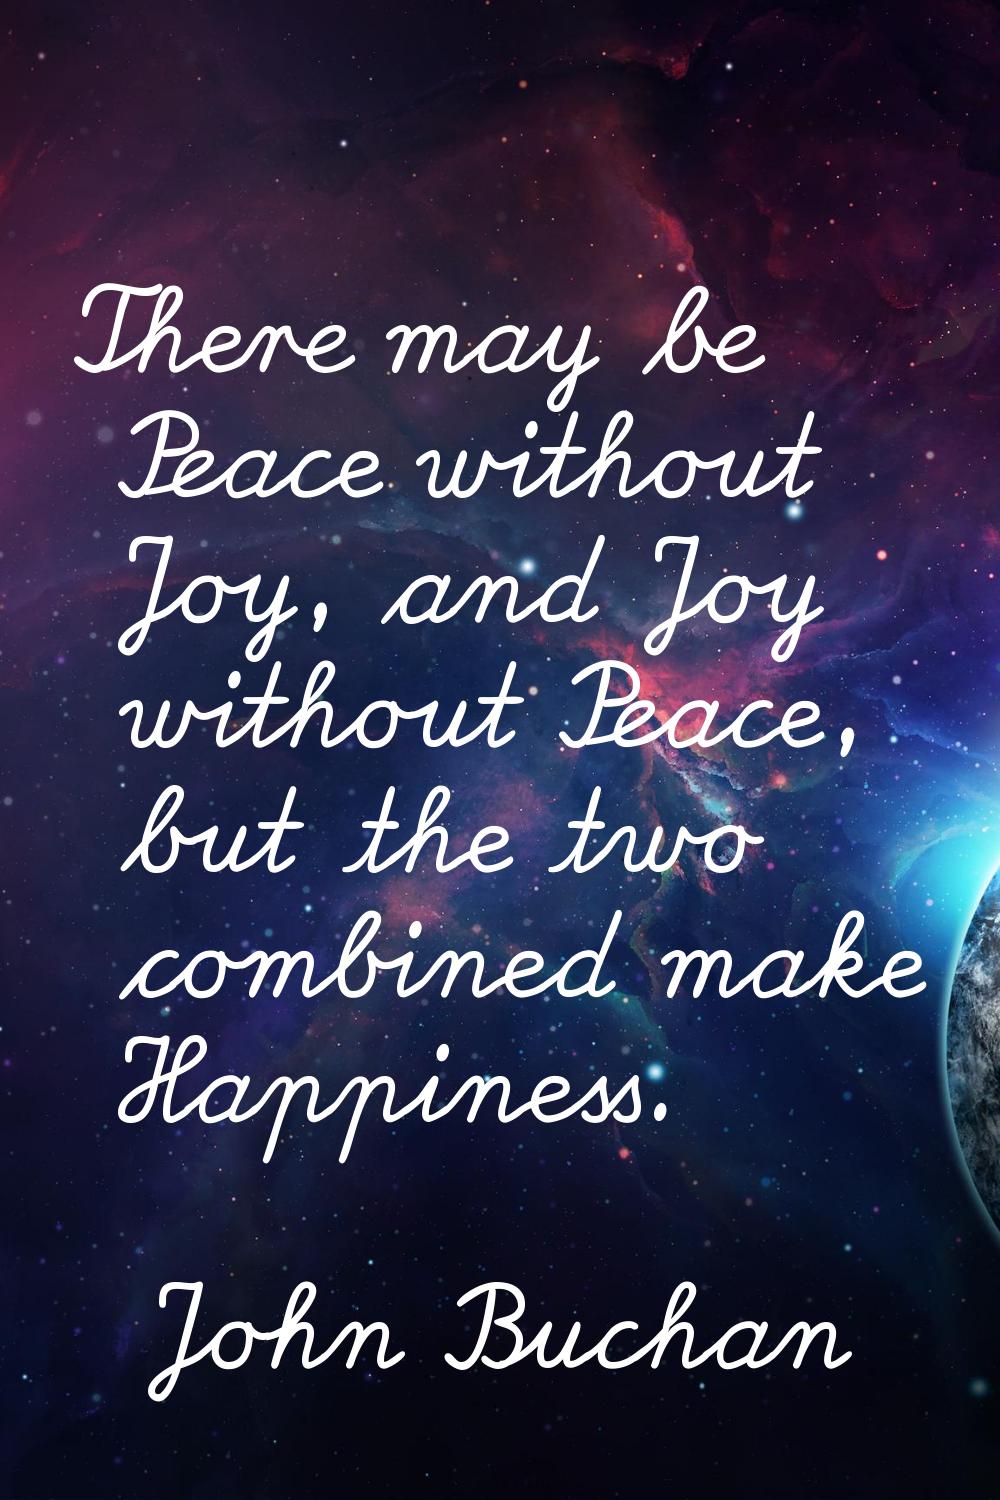 There may be Peace without Joy, and Joy without Peace, but the two combined make Happiness.